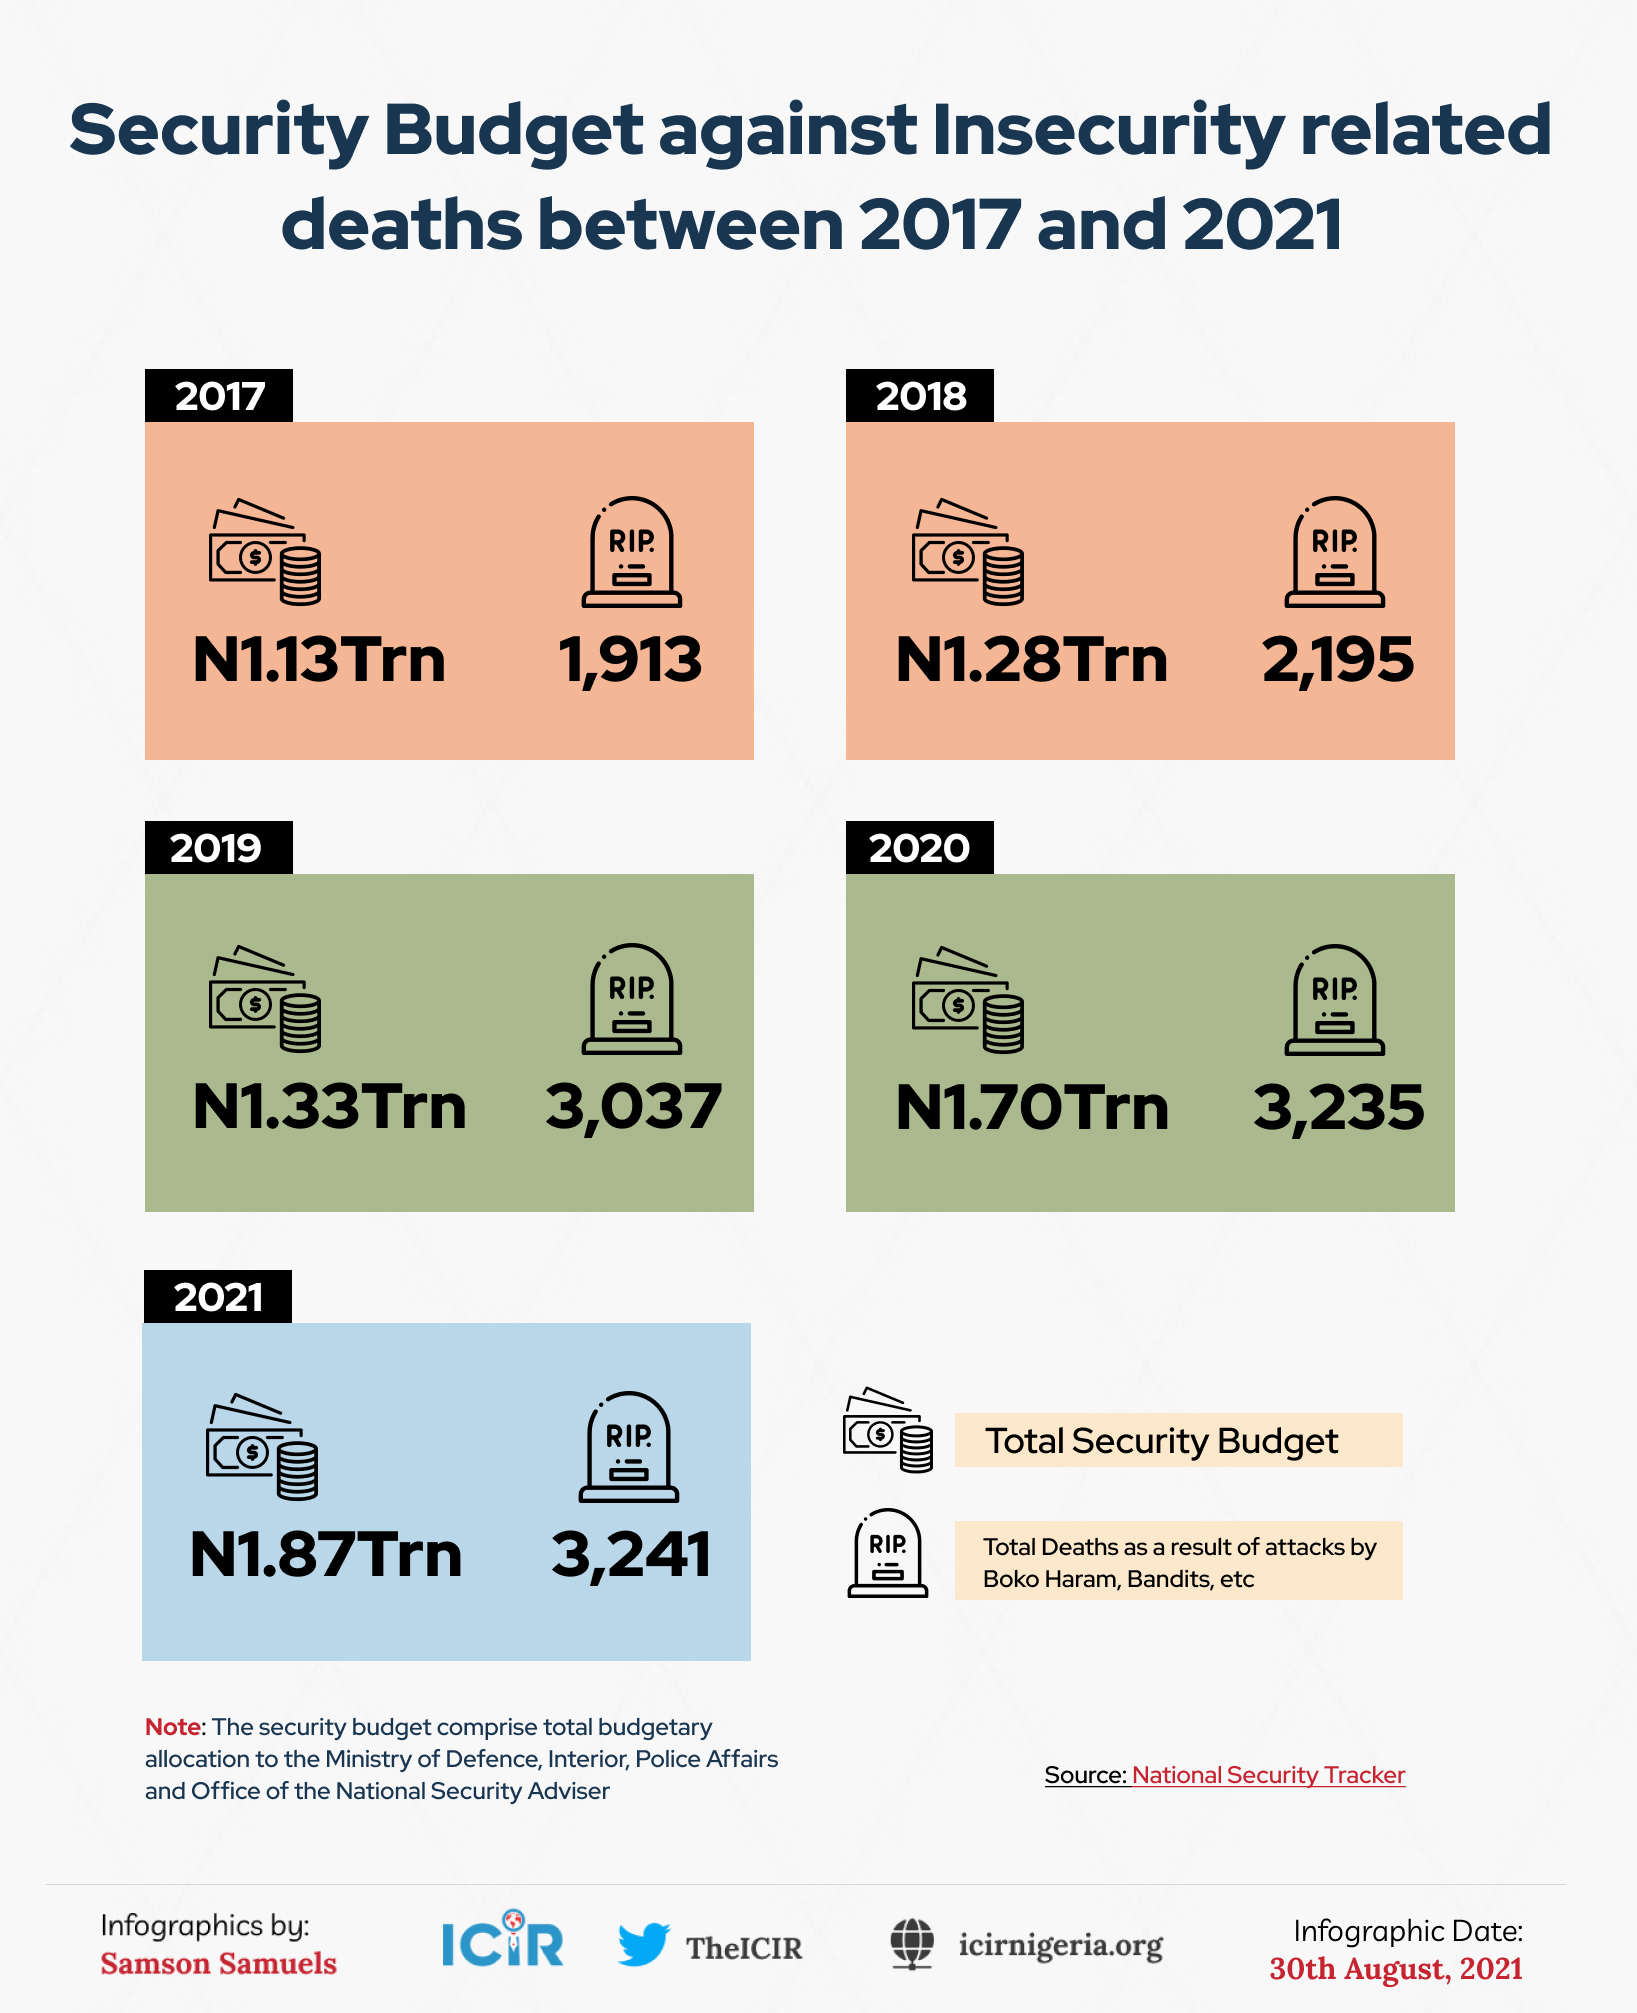 Security budget against security-related deaths between 2017 and 2021